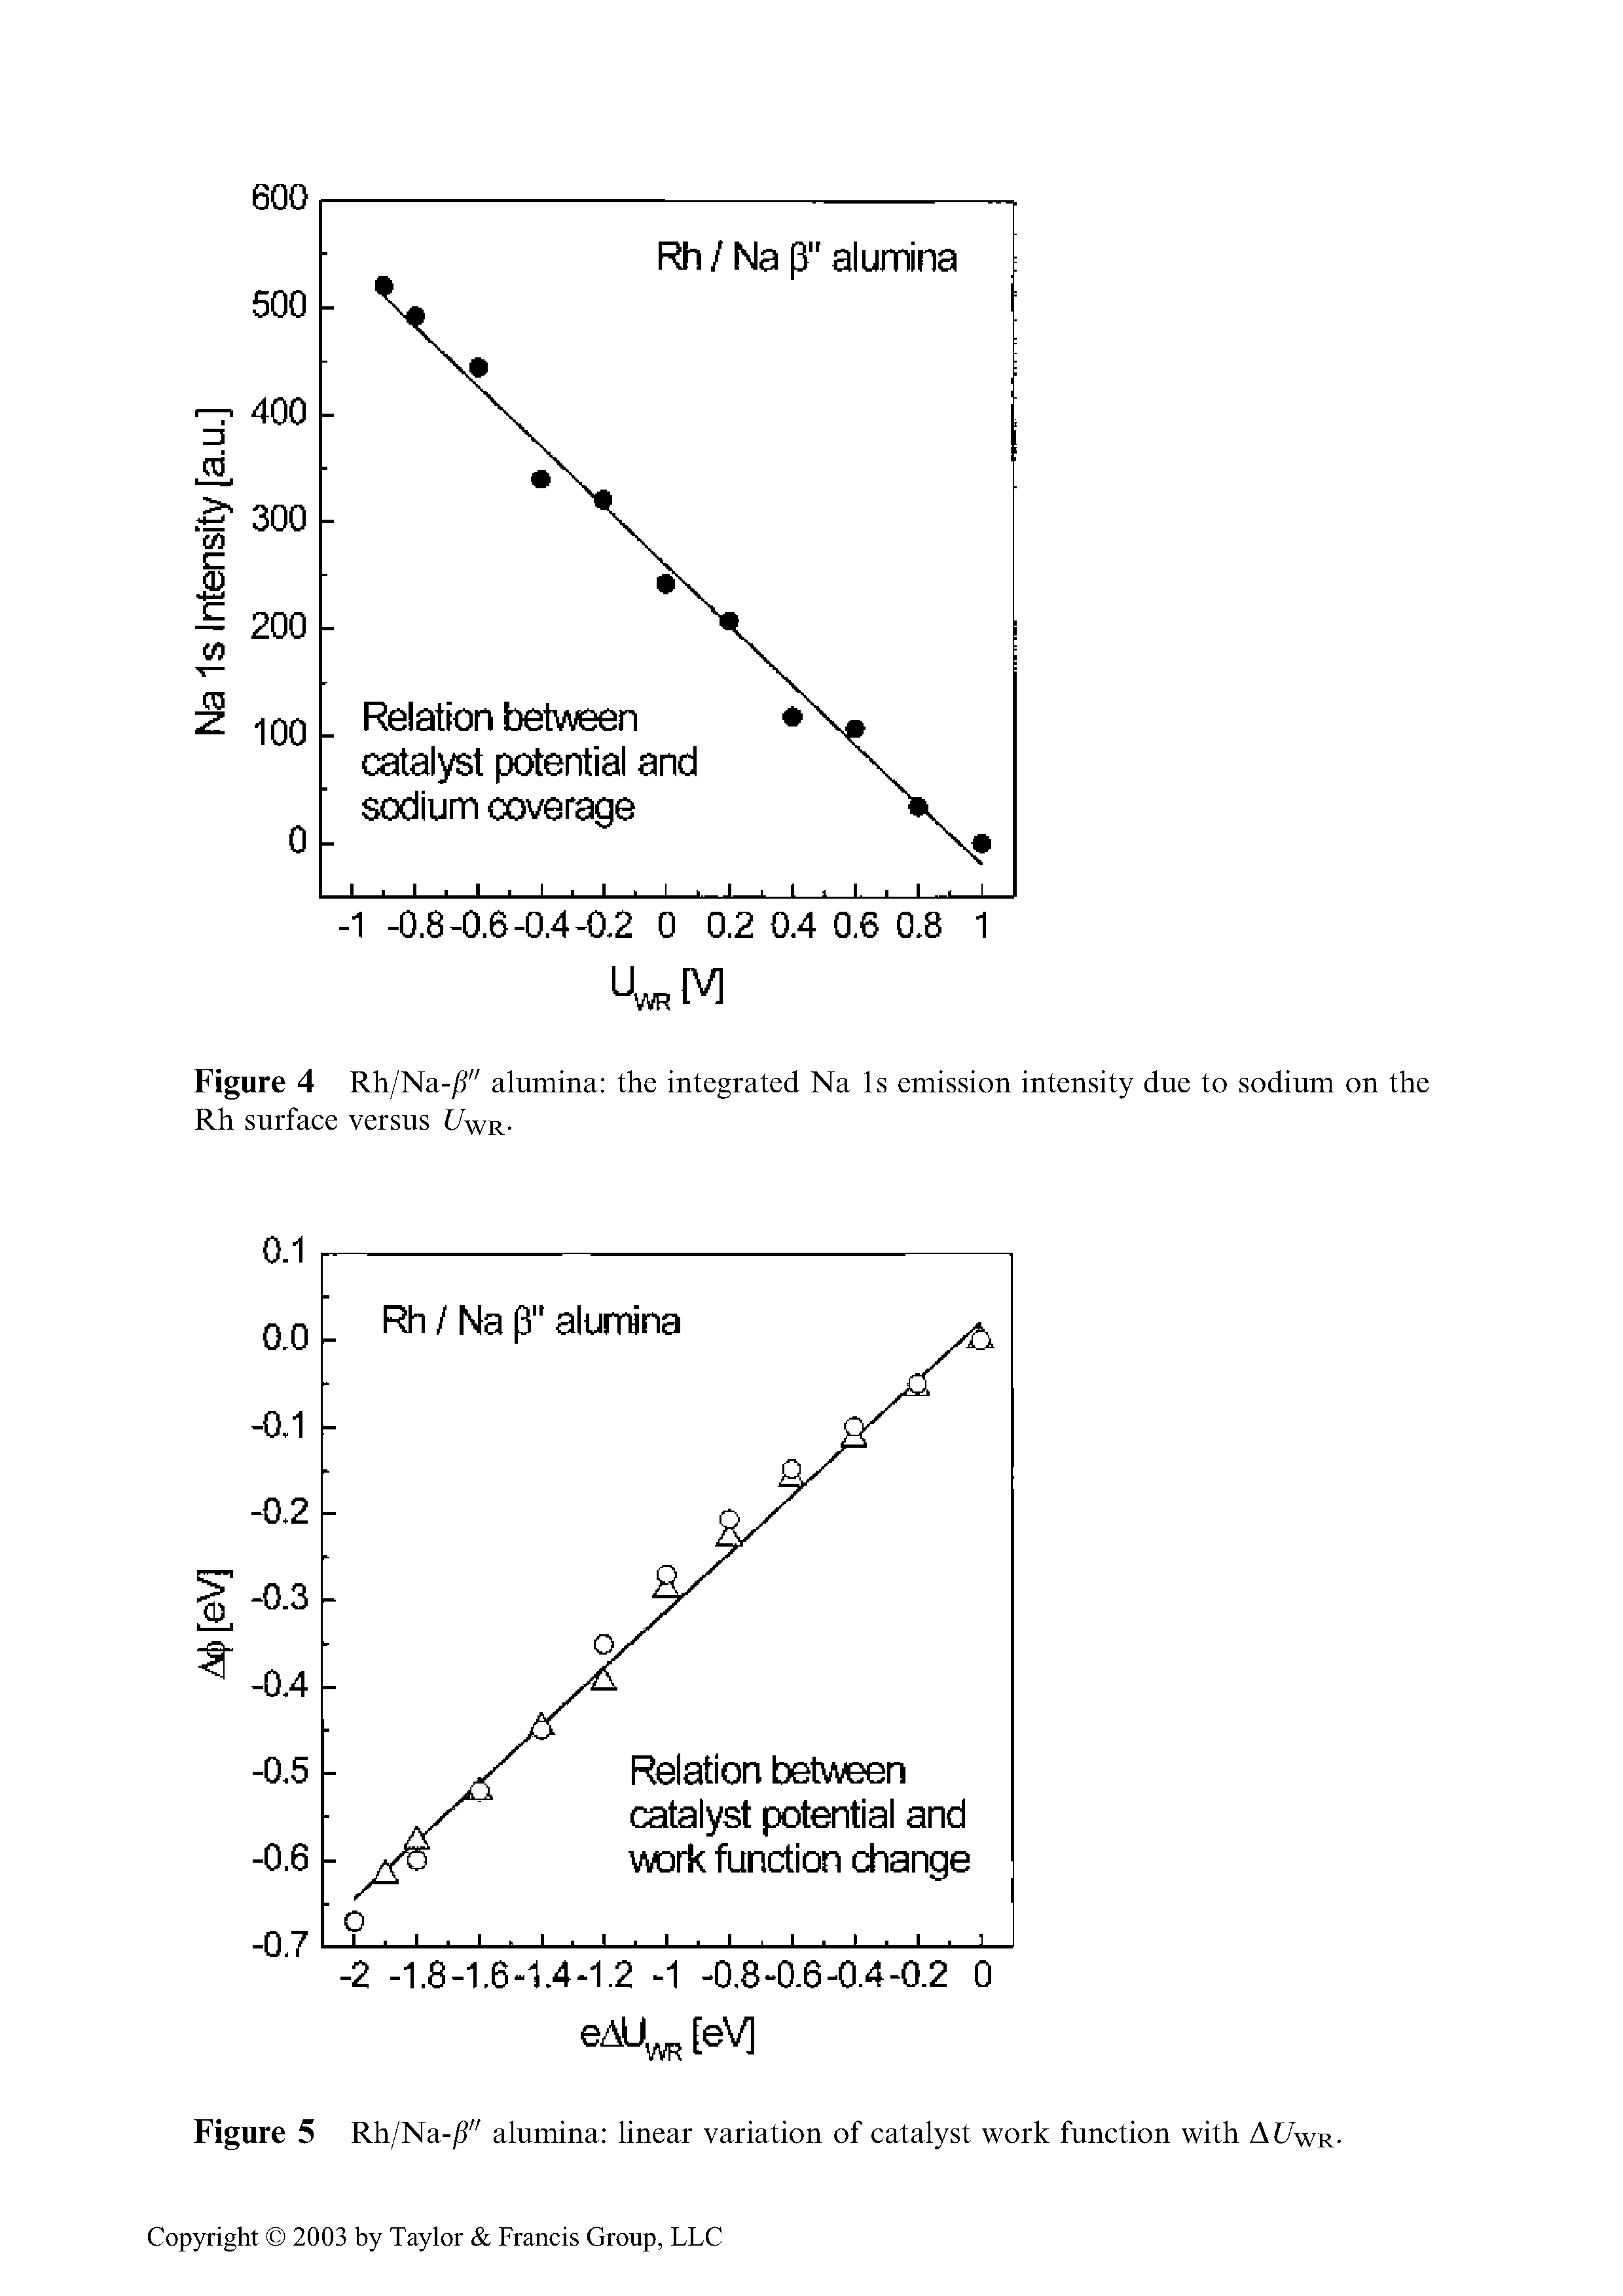 Figure 5 Rh/Na-/i" alumina linear variation of catalyst work function with Ai/wR-Copyright 2003 by Taylor Francis Group, LLC...